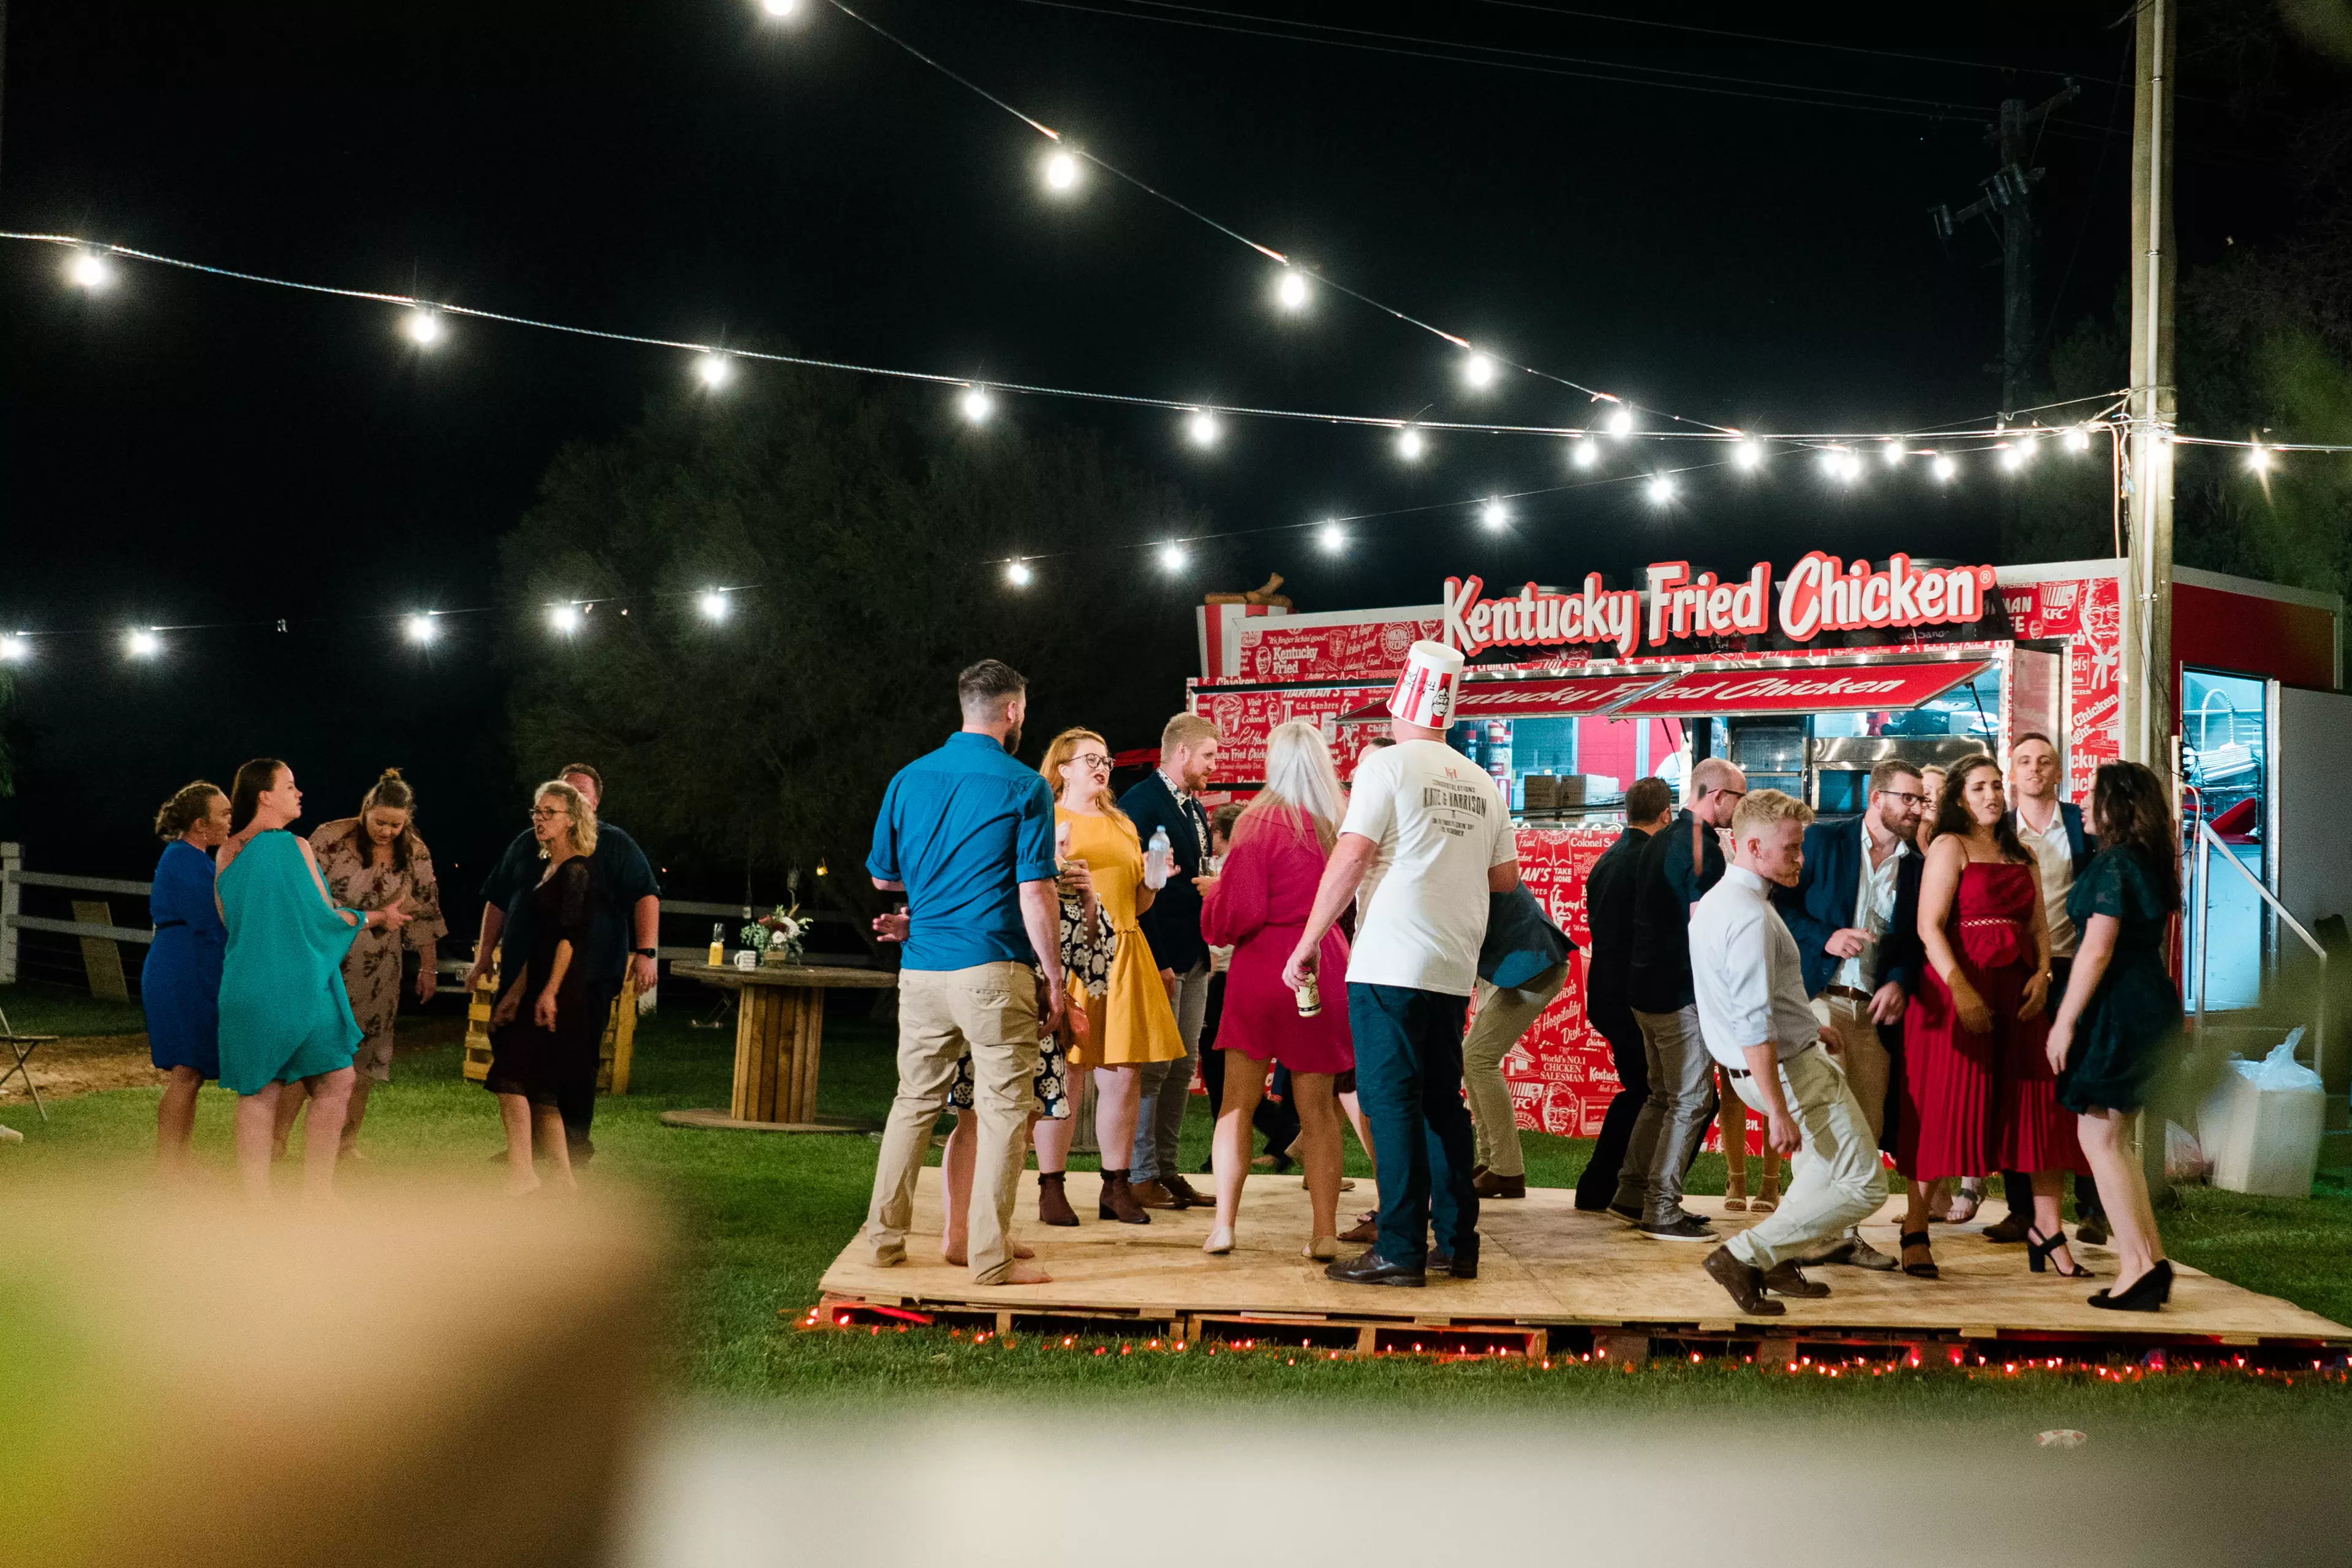 The poultry-themed nuptials featured a KFC food truck.